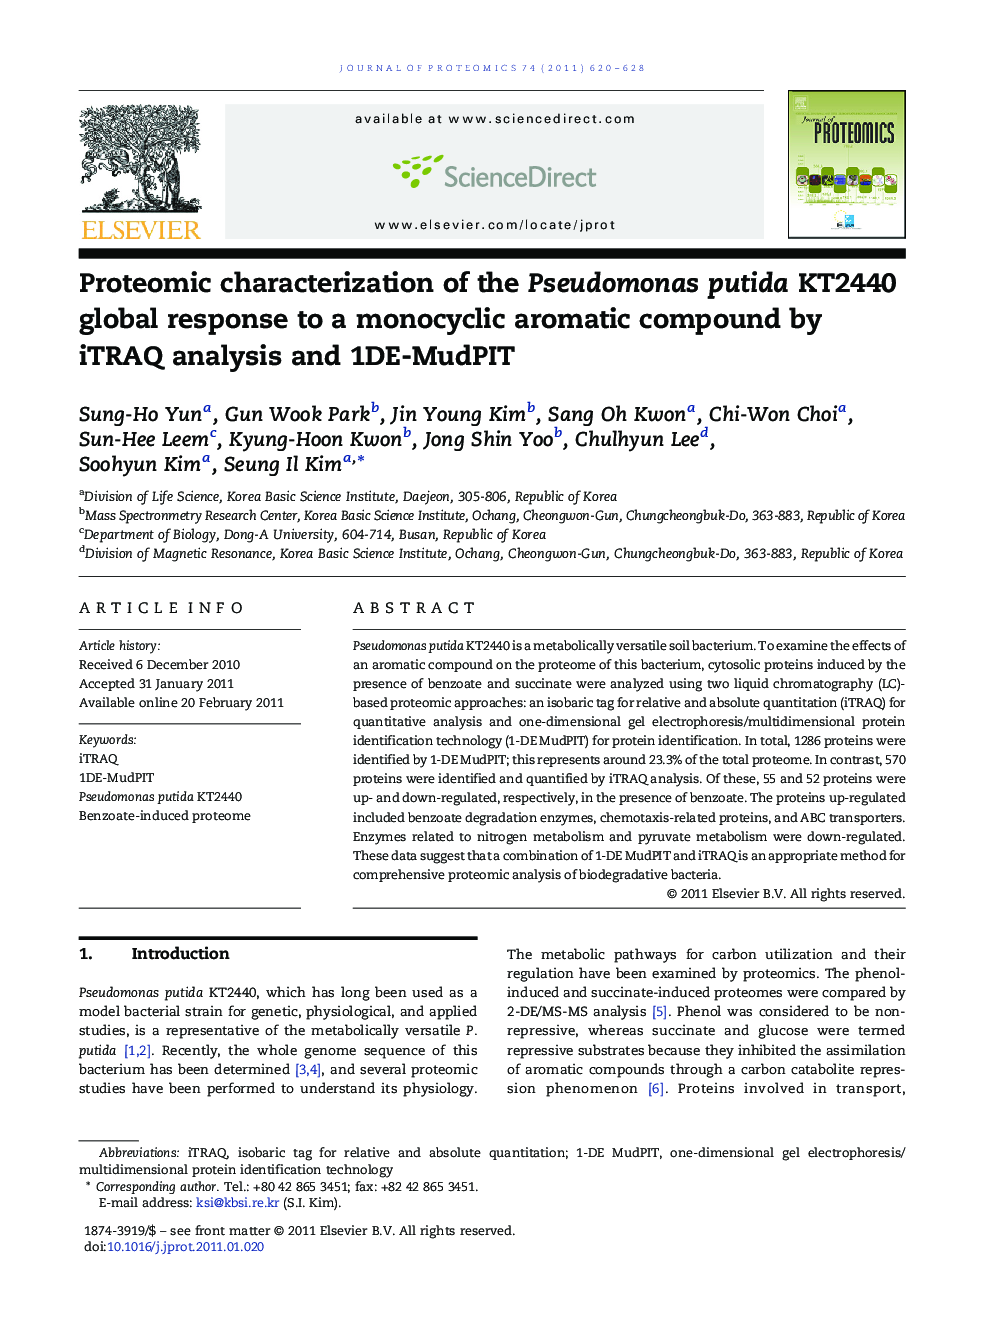 Proteomic characterization of the Pseudomonas putida KT2440 global response to a monocyclic aromatic compound by iTRAQ analysis and 1DE-MudPIT